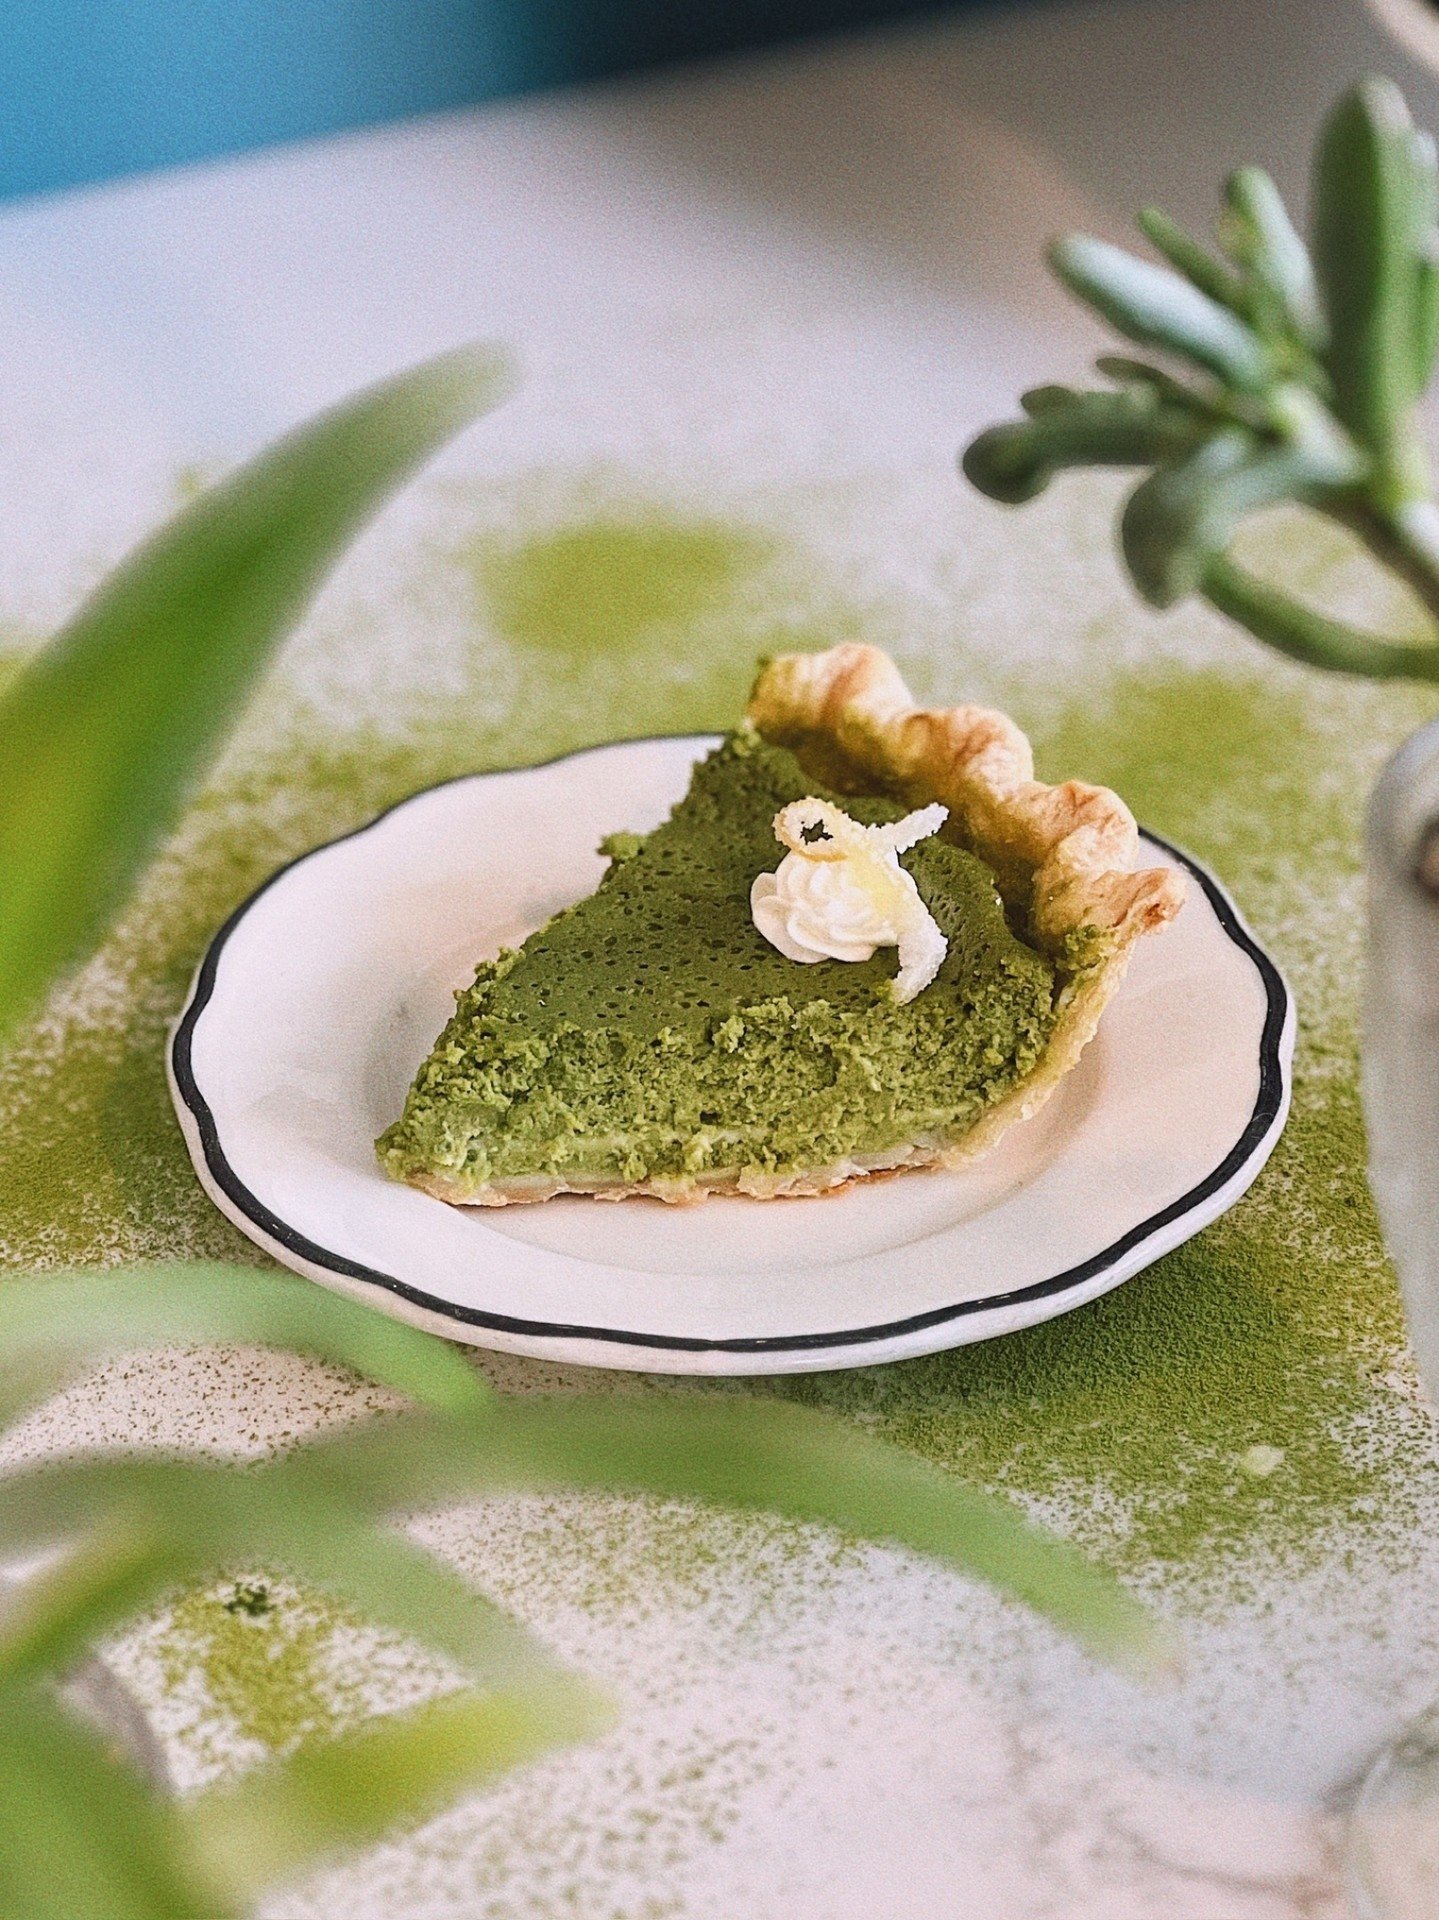 Matcha Chess with Candied Lemon &amp; Fresh Whipped Cream ✨
&bull;
So happy to have this amazing pie on the menu this week!! Chess pies feature a southern style baked custard, and this one is made with powdered Japanese green tea! The candied lemon a